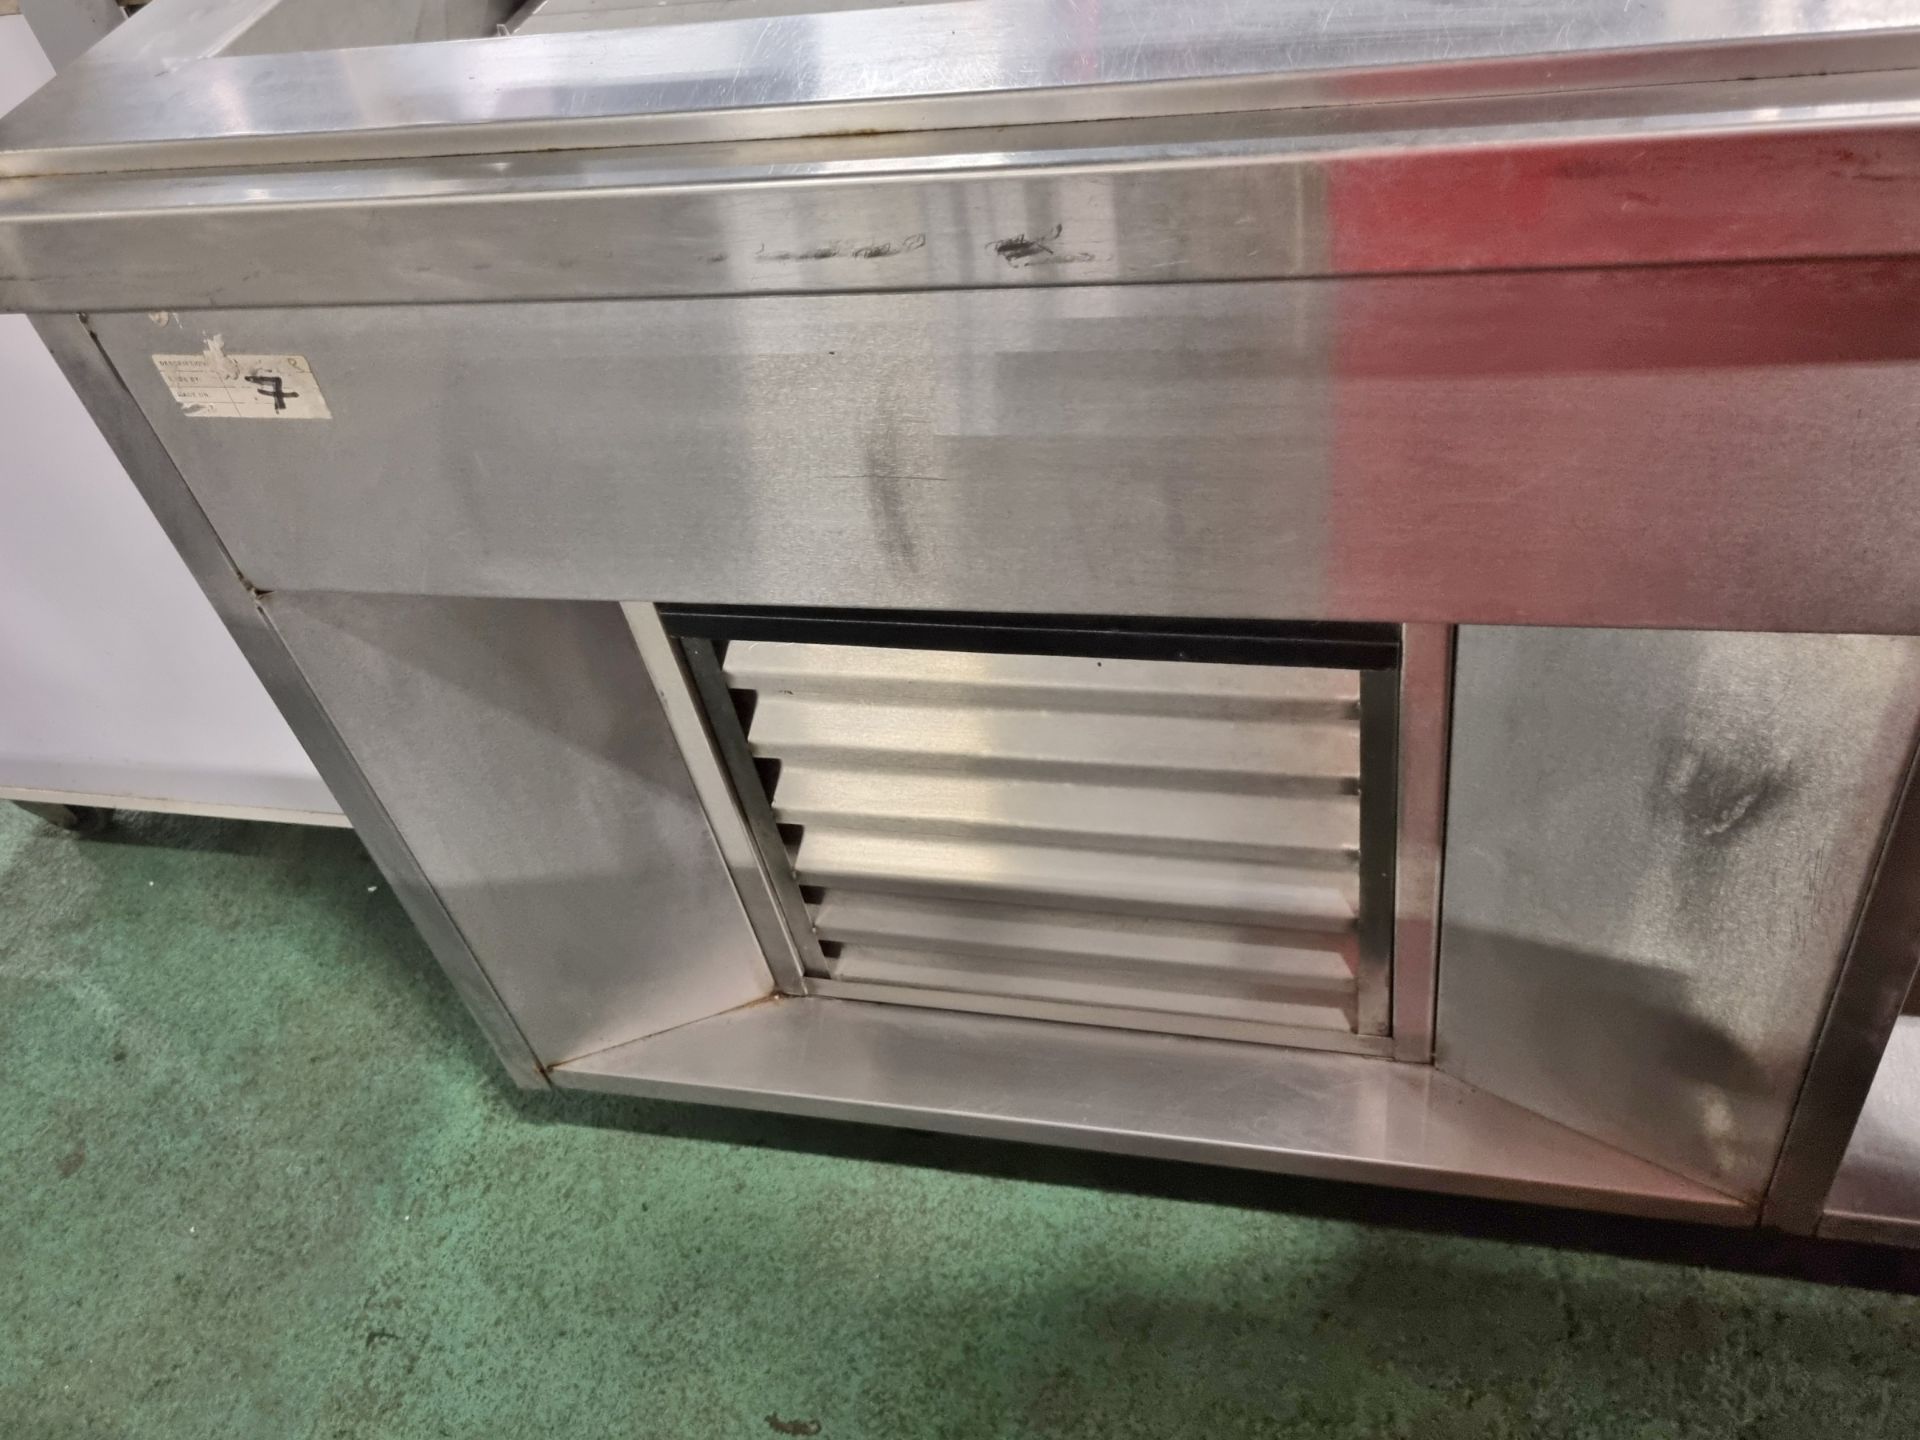 Stainless steel unit with bain marie & hot plate section - W 1800 x D 700 x H 1370mm - Image 6 of 6